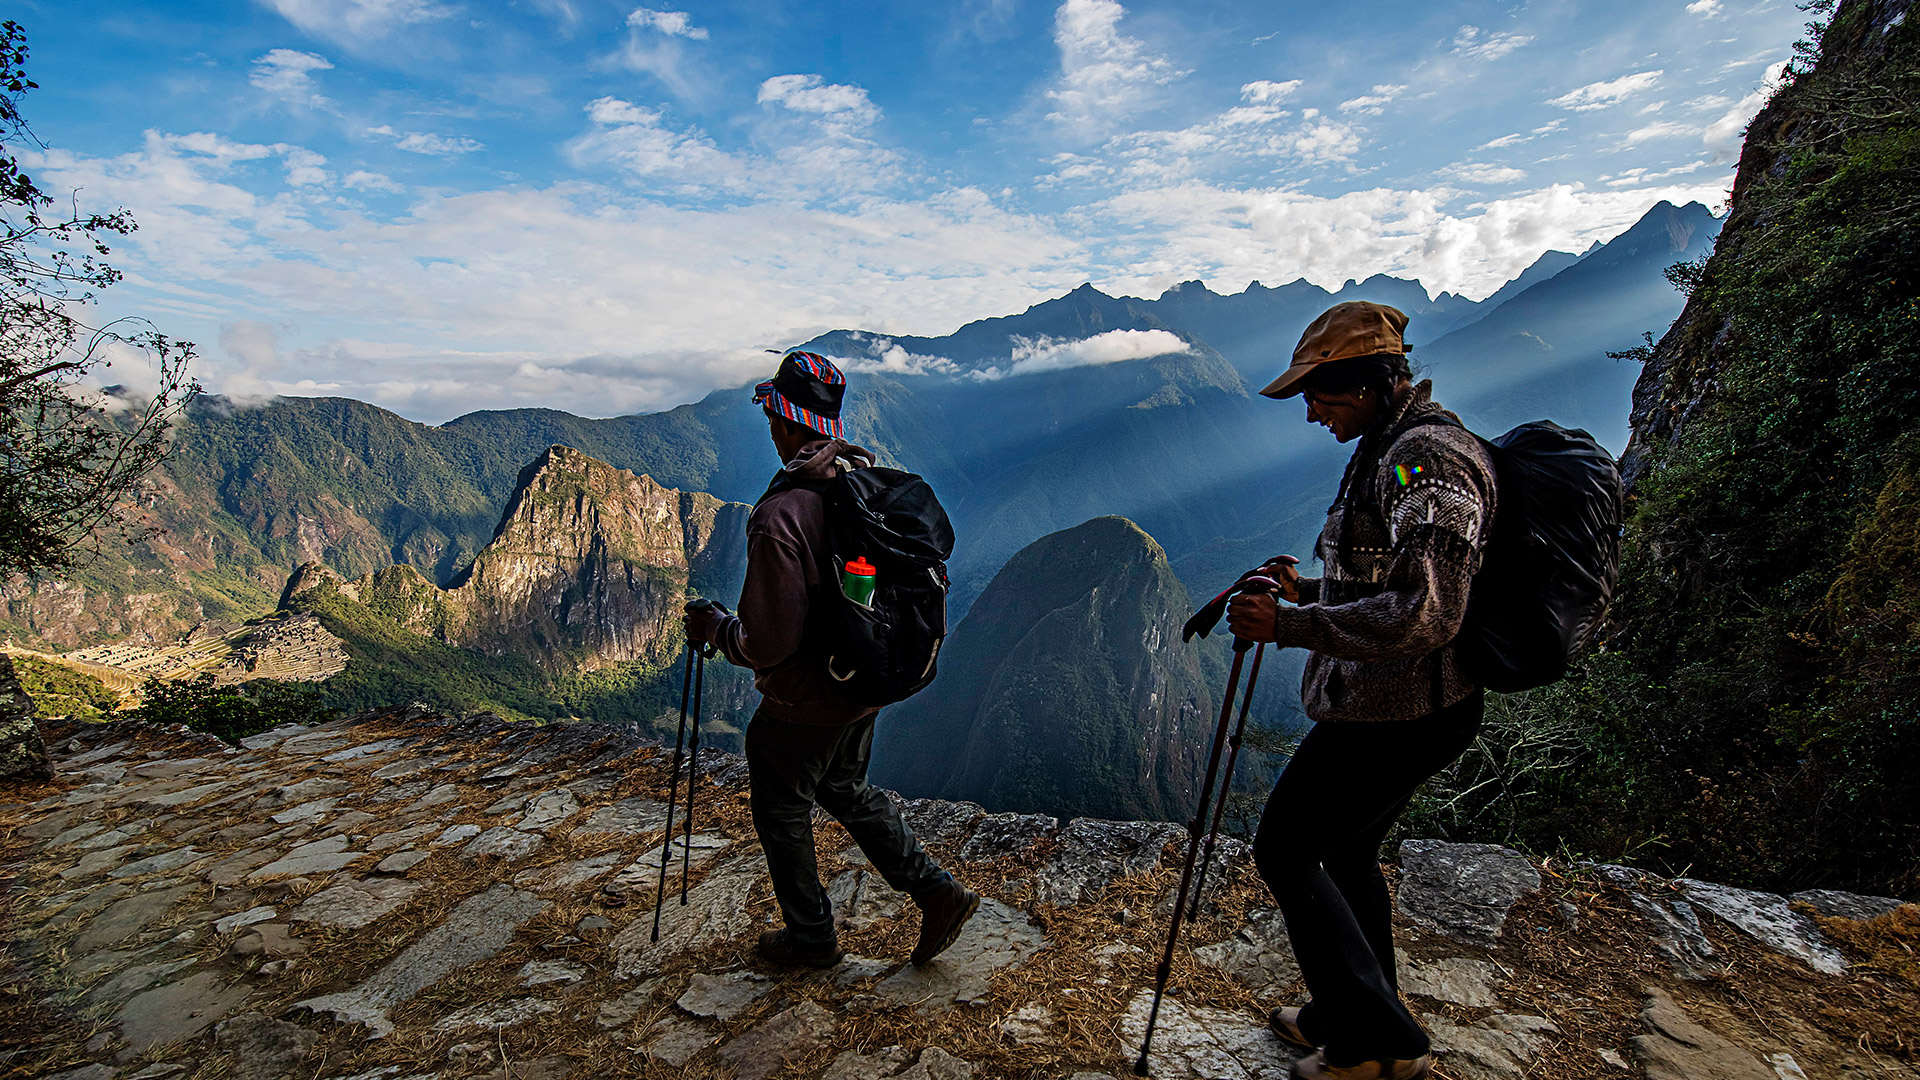 Panoramic view of tourists arriving at Machu Picchu by the classic Inca trail